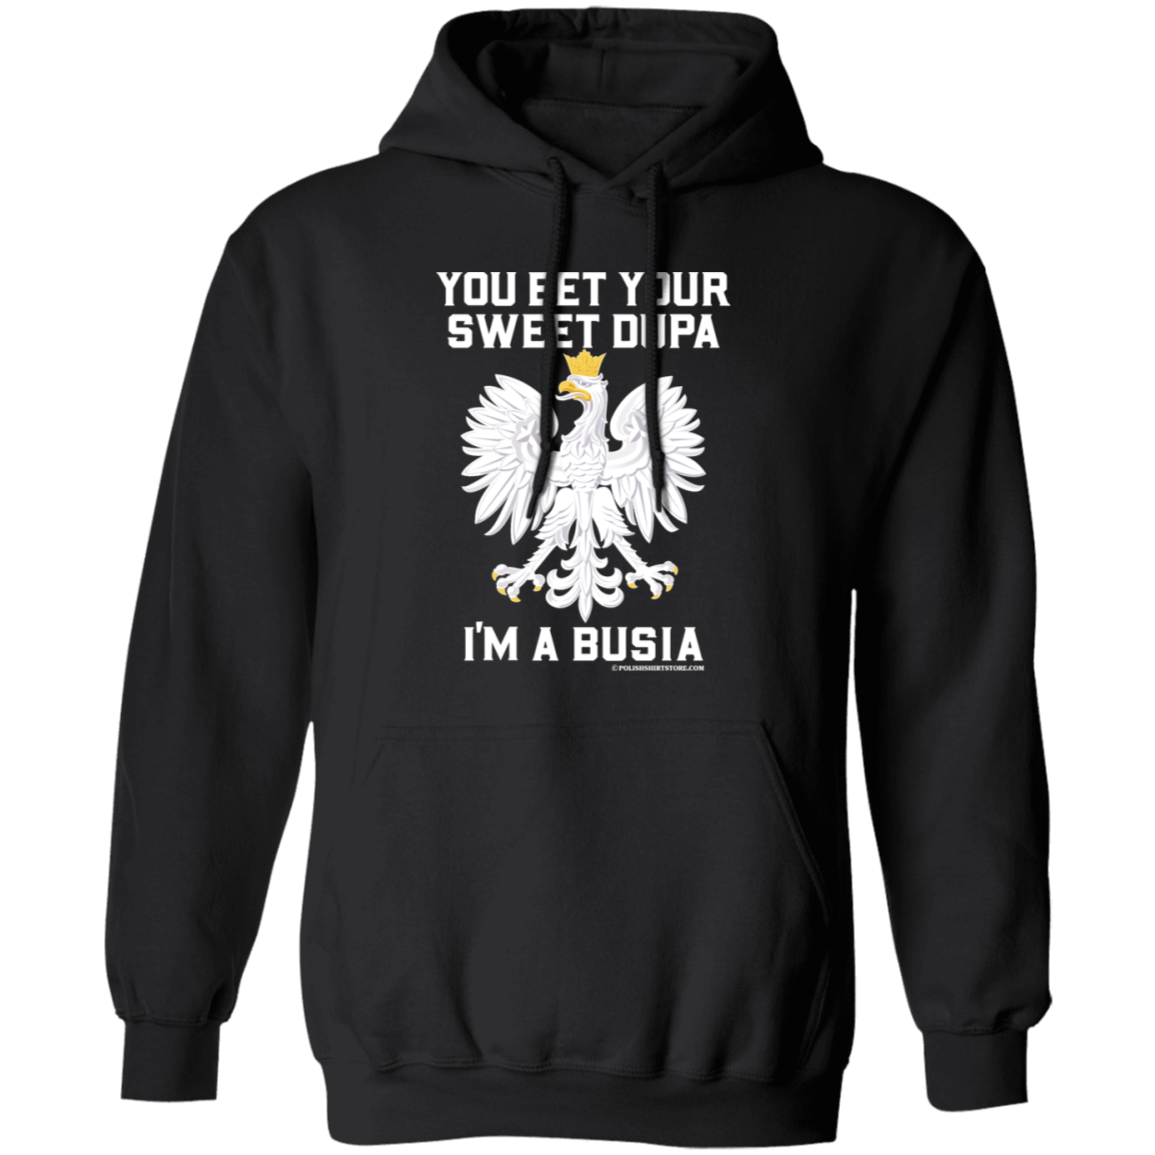 You Bet Your Sweet Dupa I'm A Busia Apparel CustomCat G185 Pullover Hoodie Black S